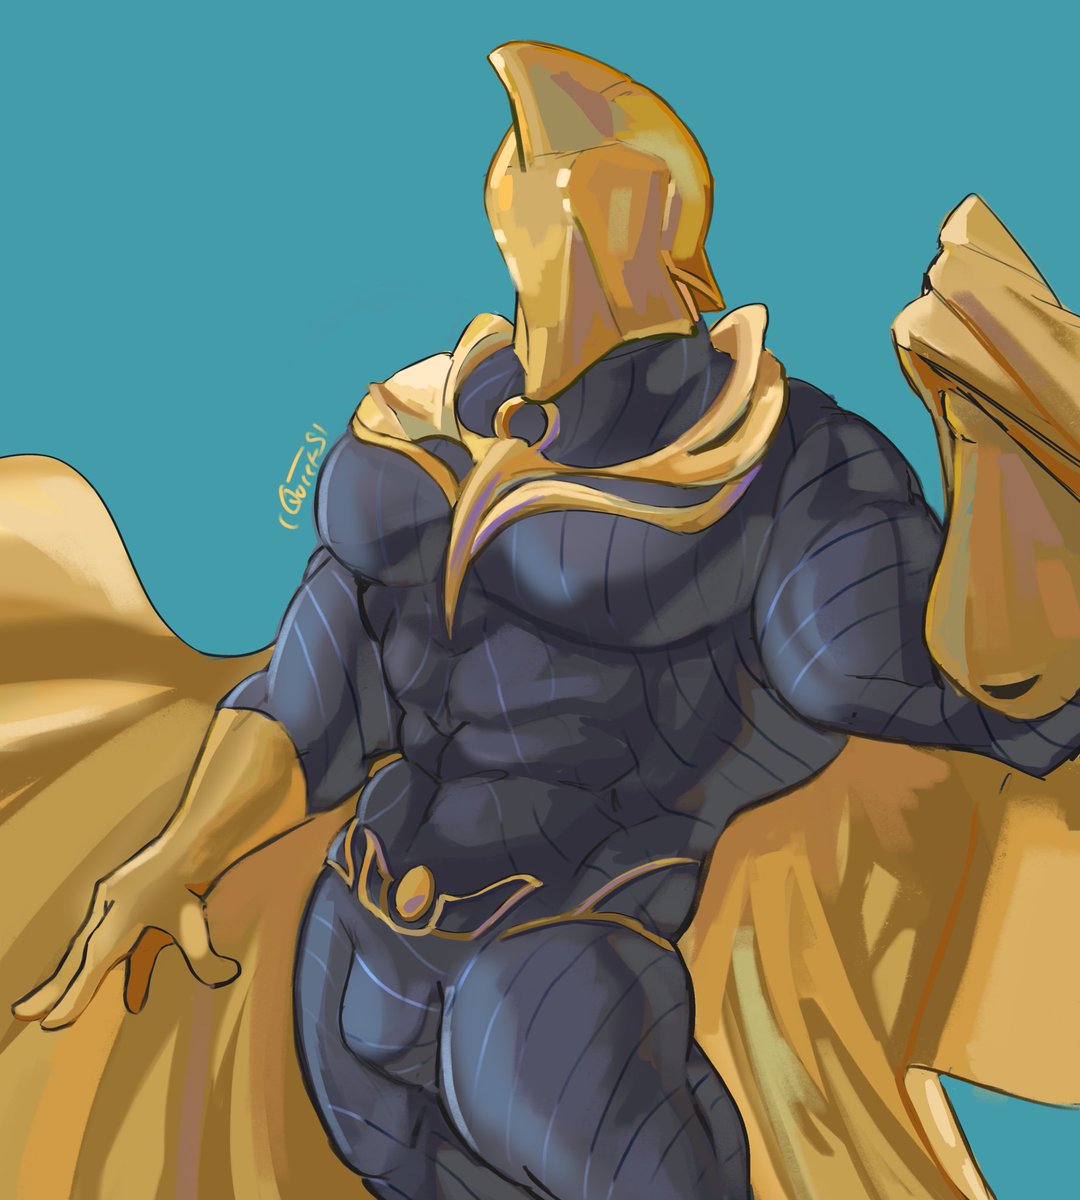 I was very into Doctor Fate’s suit